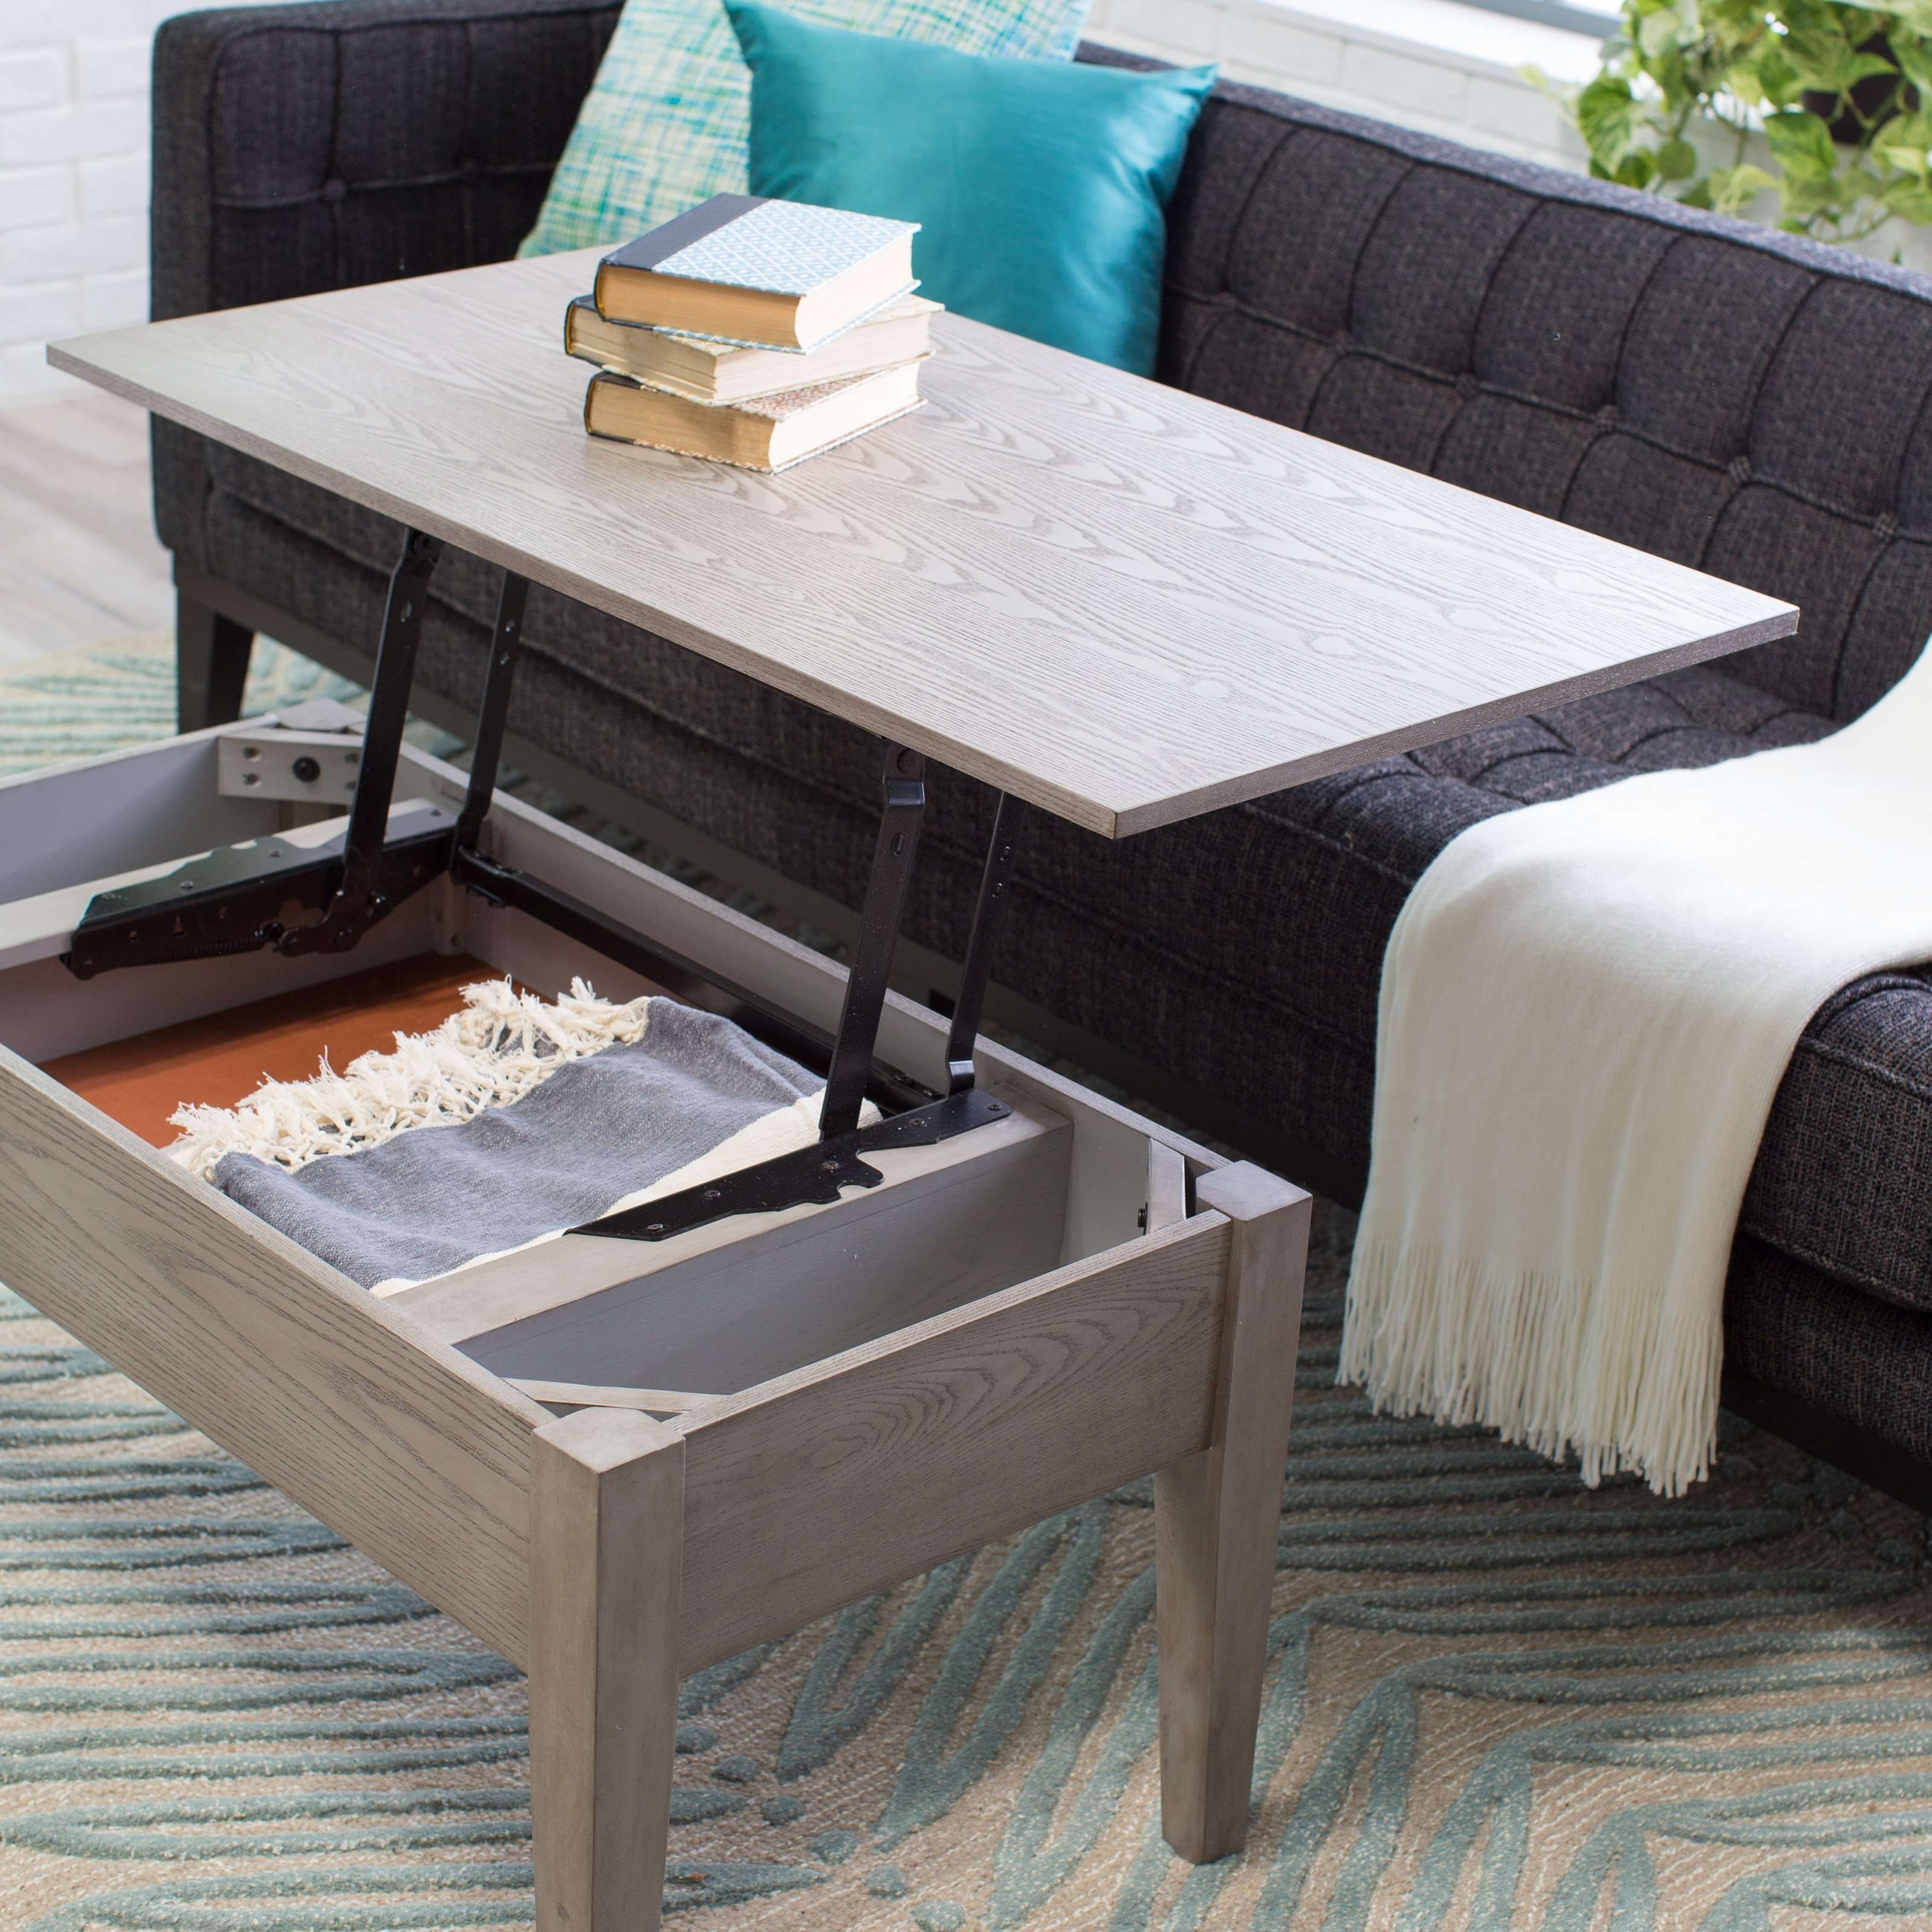 Hayneedle Throughout Fashionable Lift Top Coffee Table Furniture (View 1 of 20)